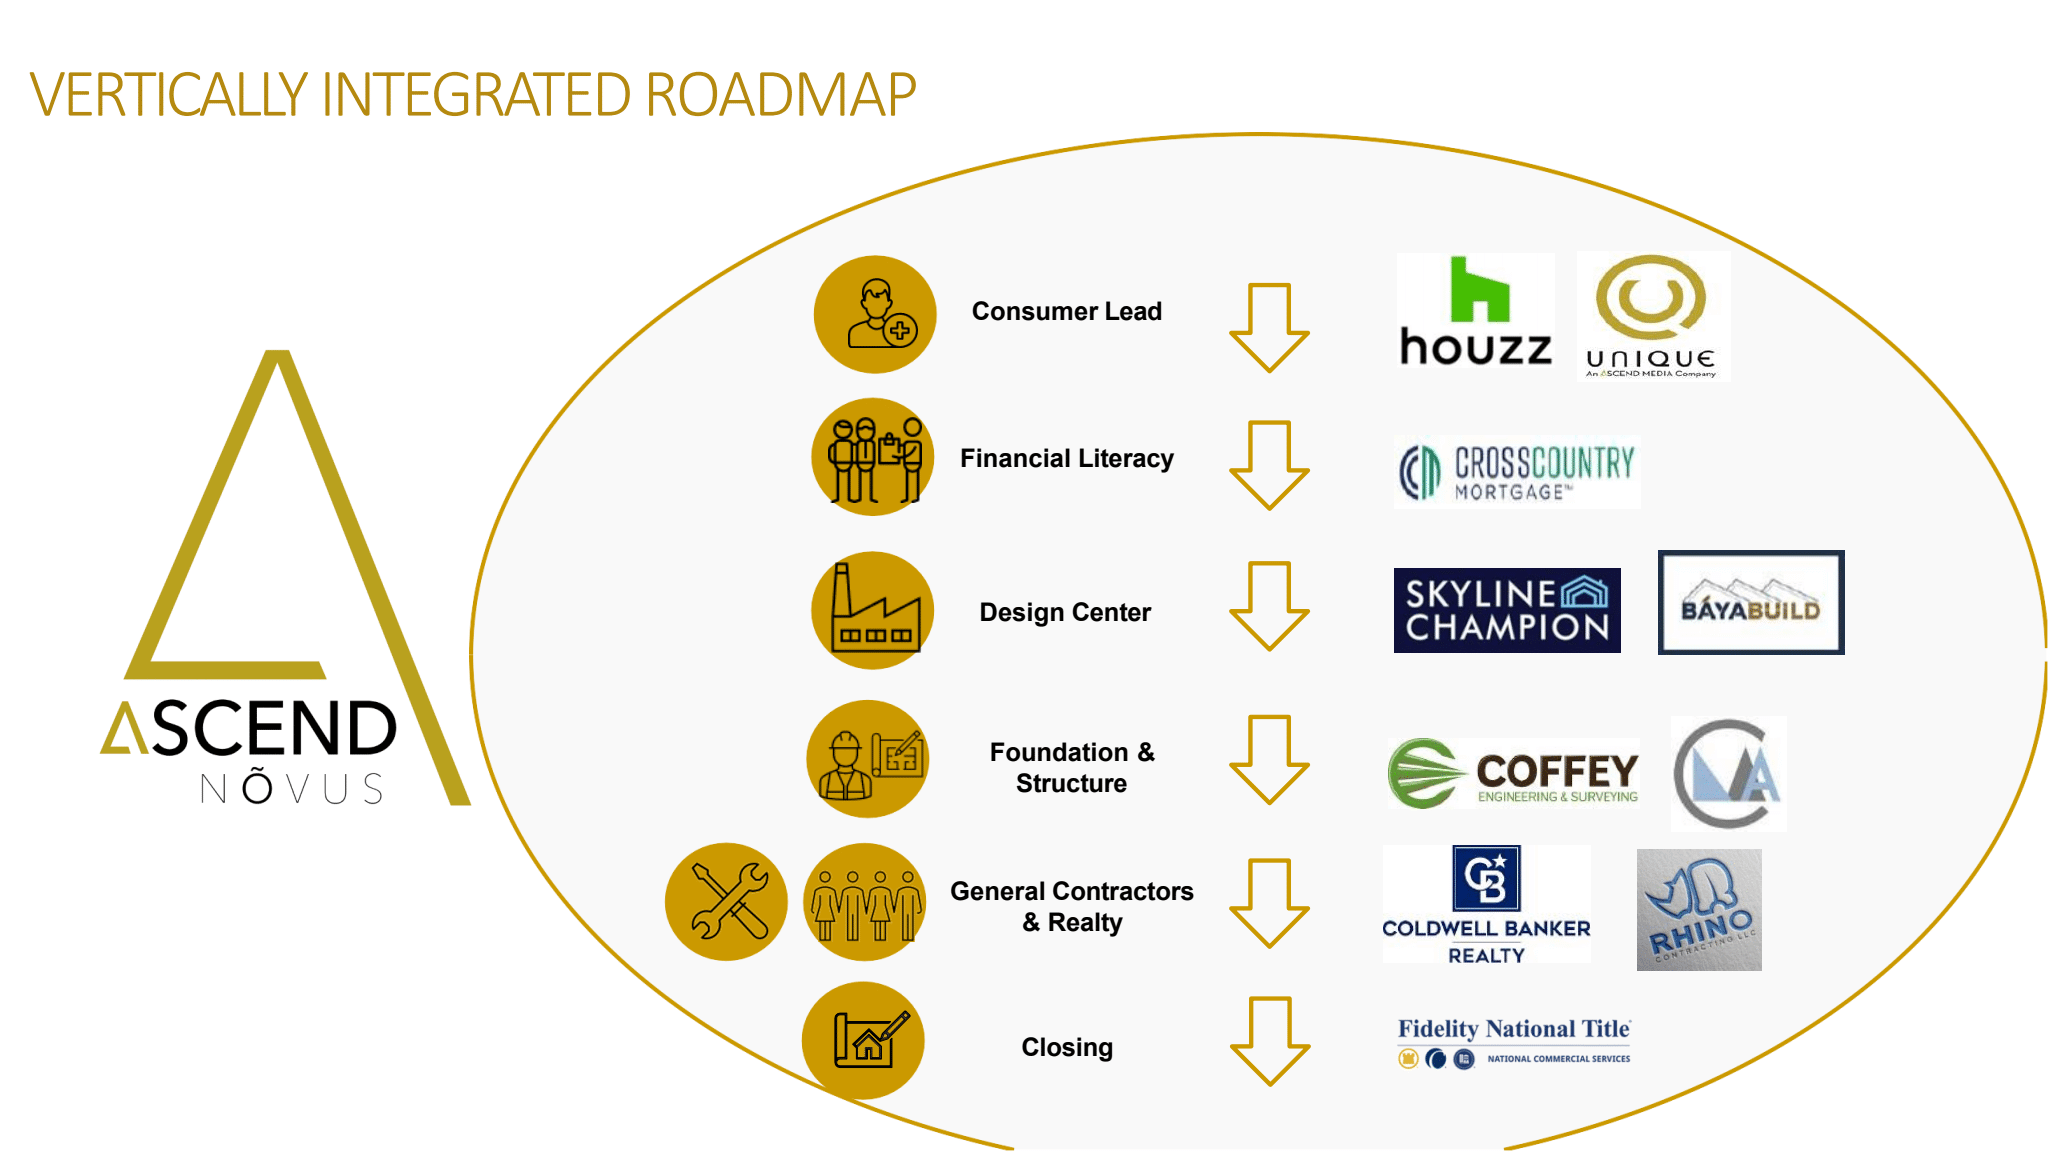 Vertically integrated roadmap